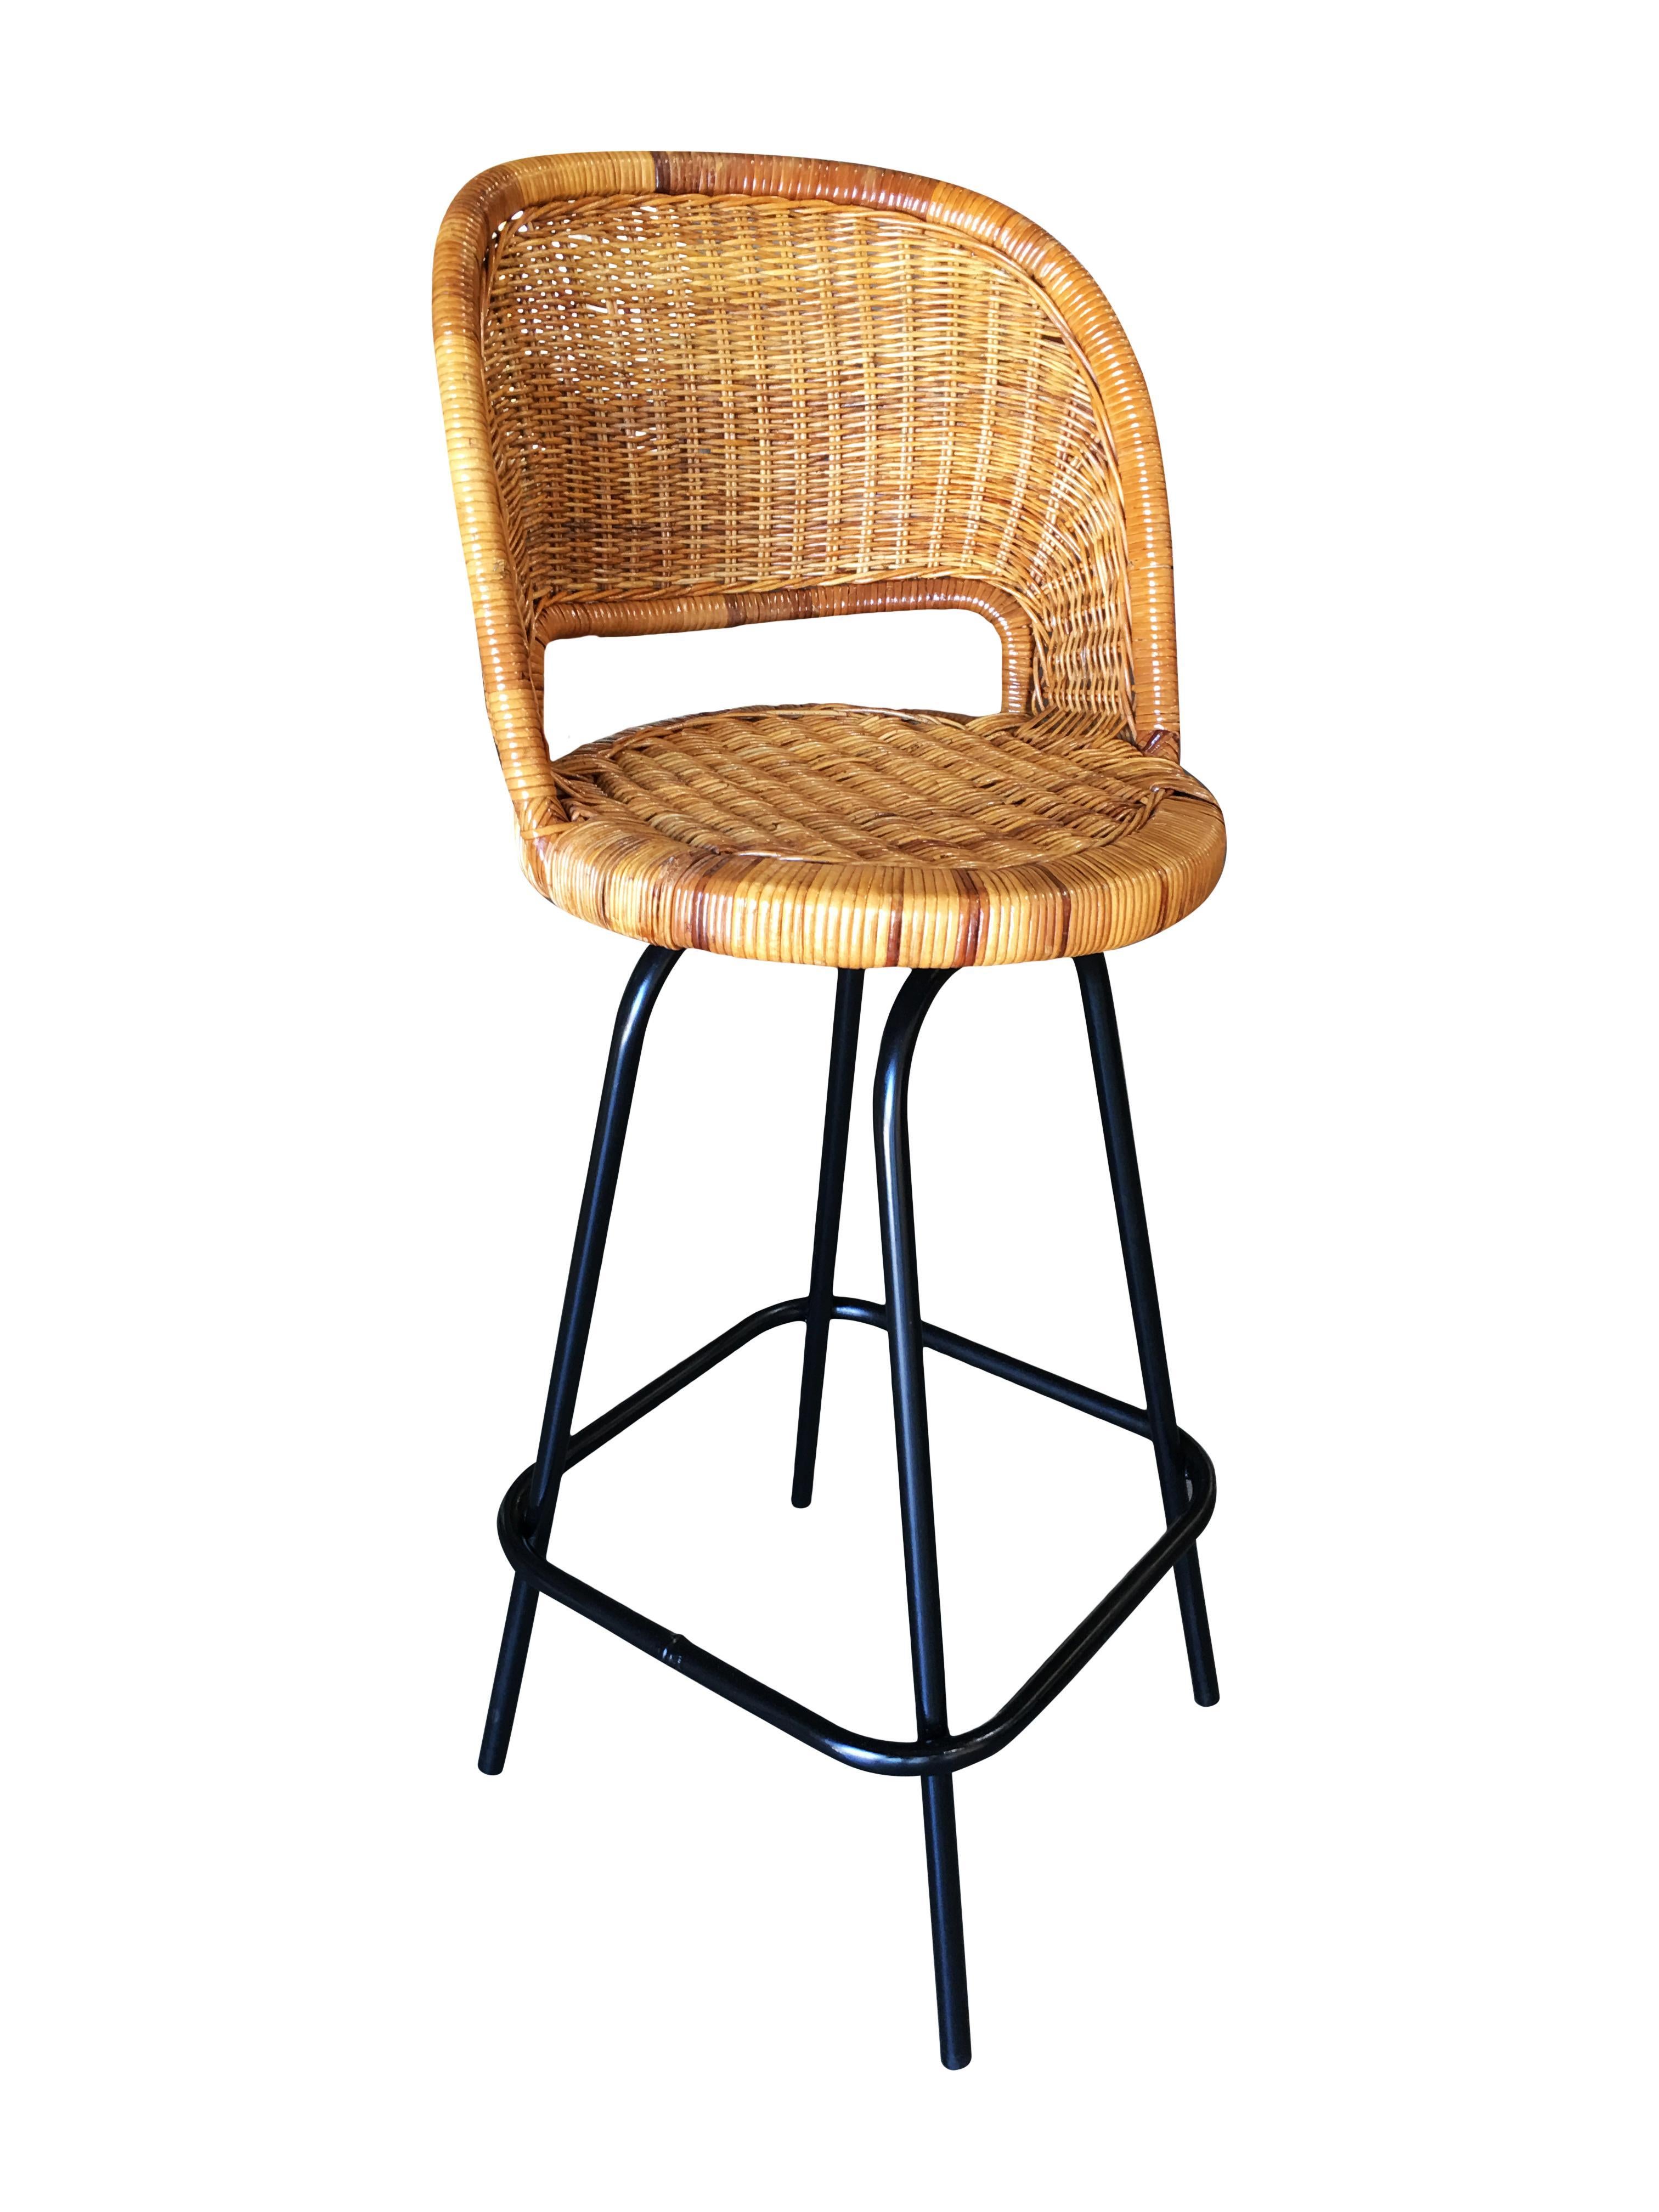 Set of 3 Swivel Wicker Bar Stools in the Seng of Chicago Style featuring a Woven Wicker seat and black enameled steel base. All of them feature swivel bases. The stools are in excellent condition and the swivel action functions perfectly. Circa